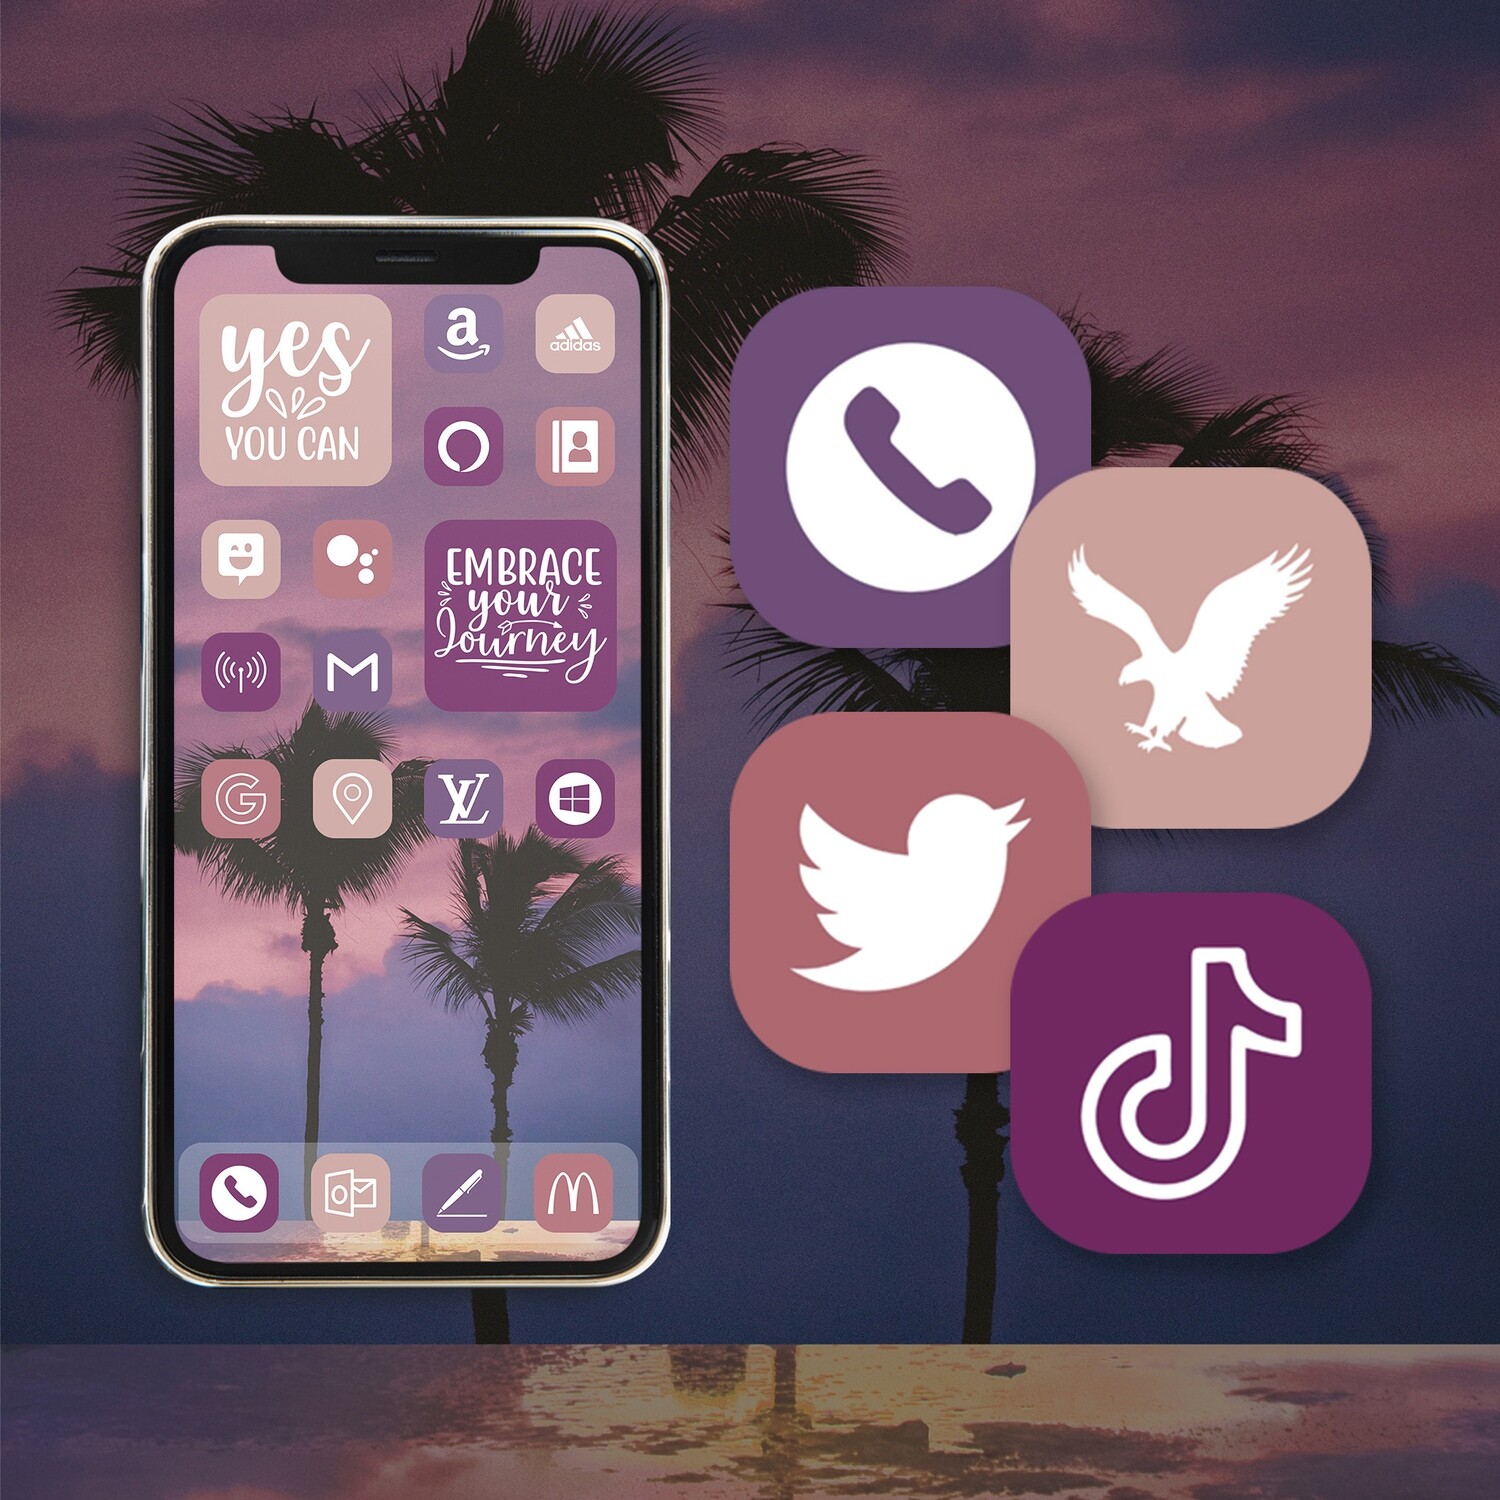 Byzantium Color app icons ios 15 icons aesthetic